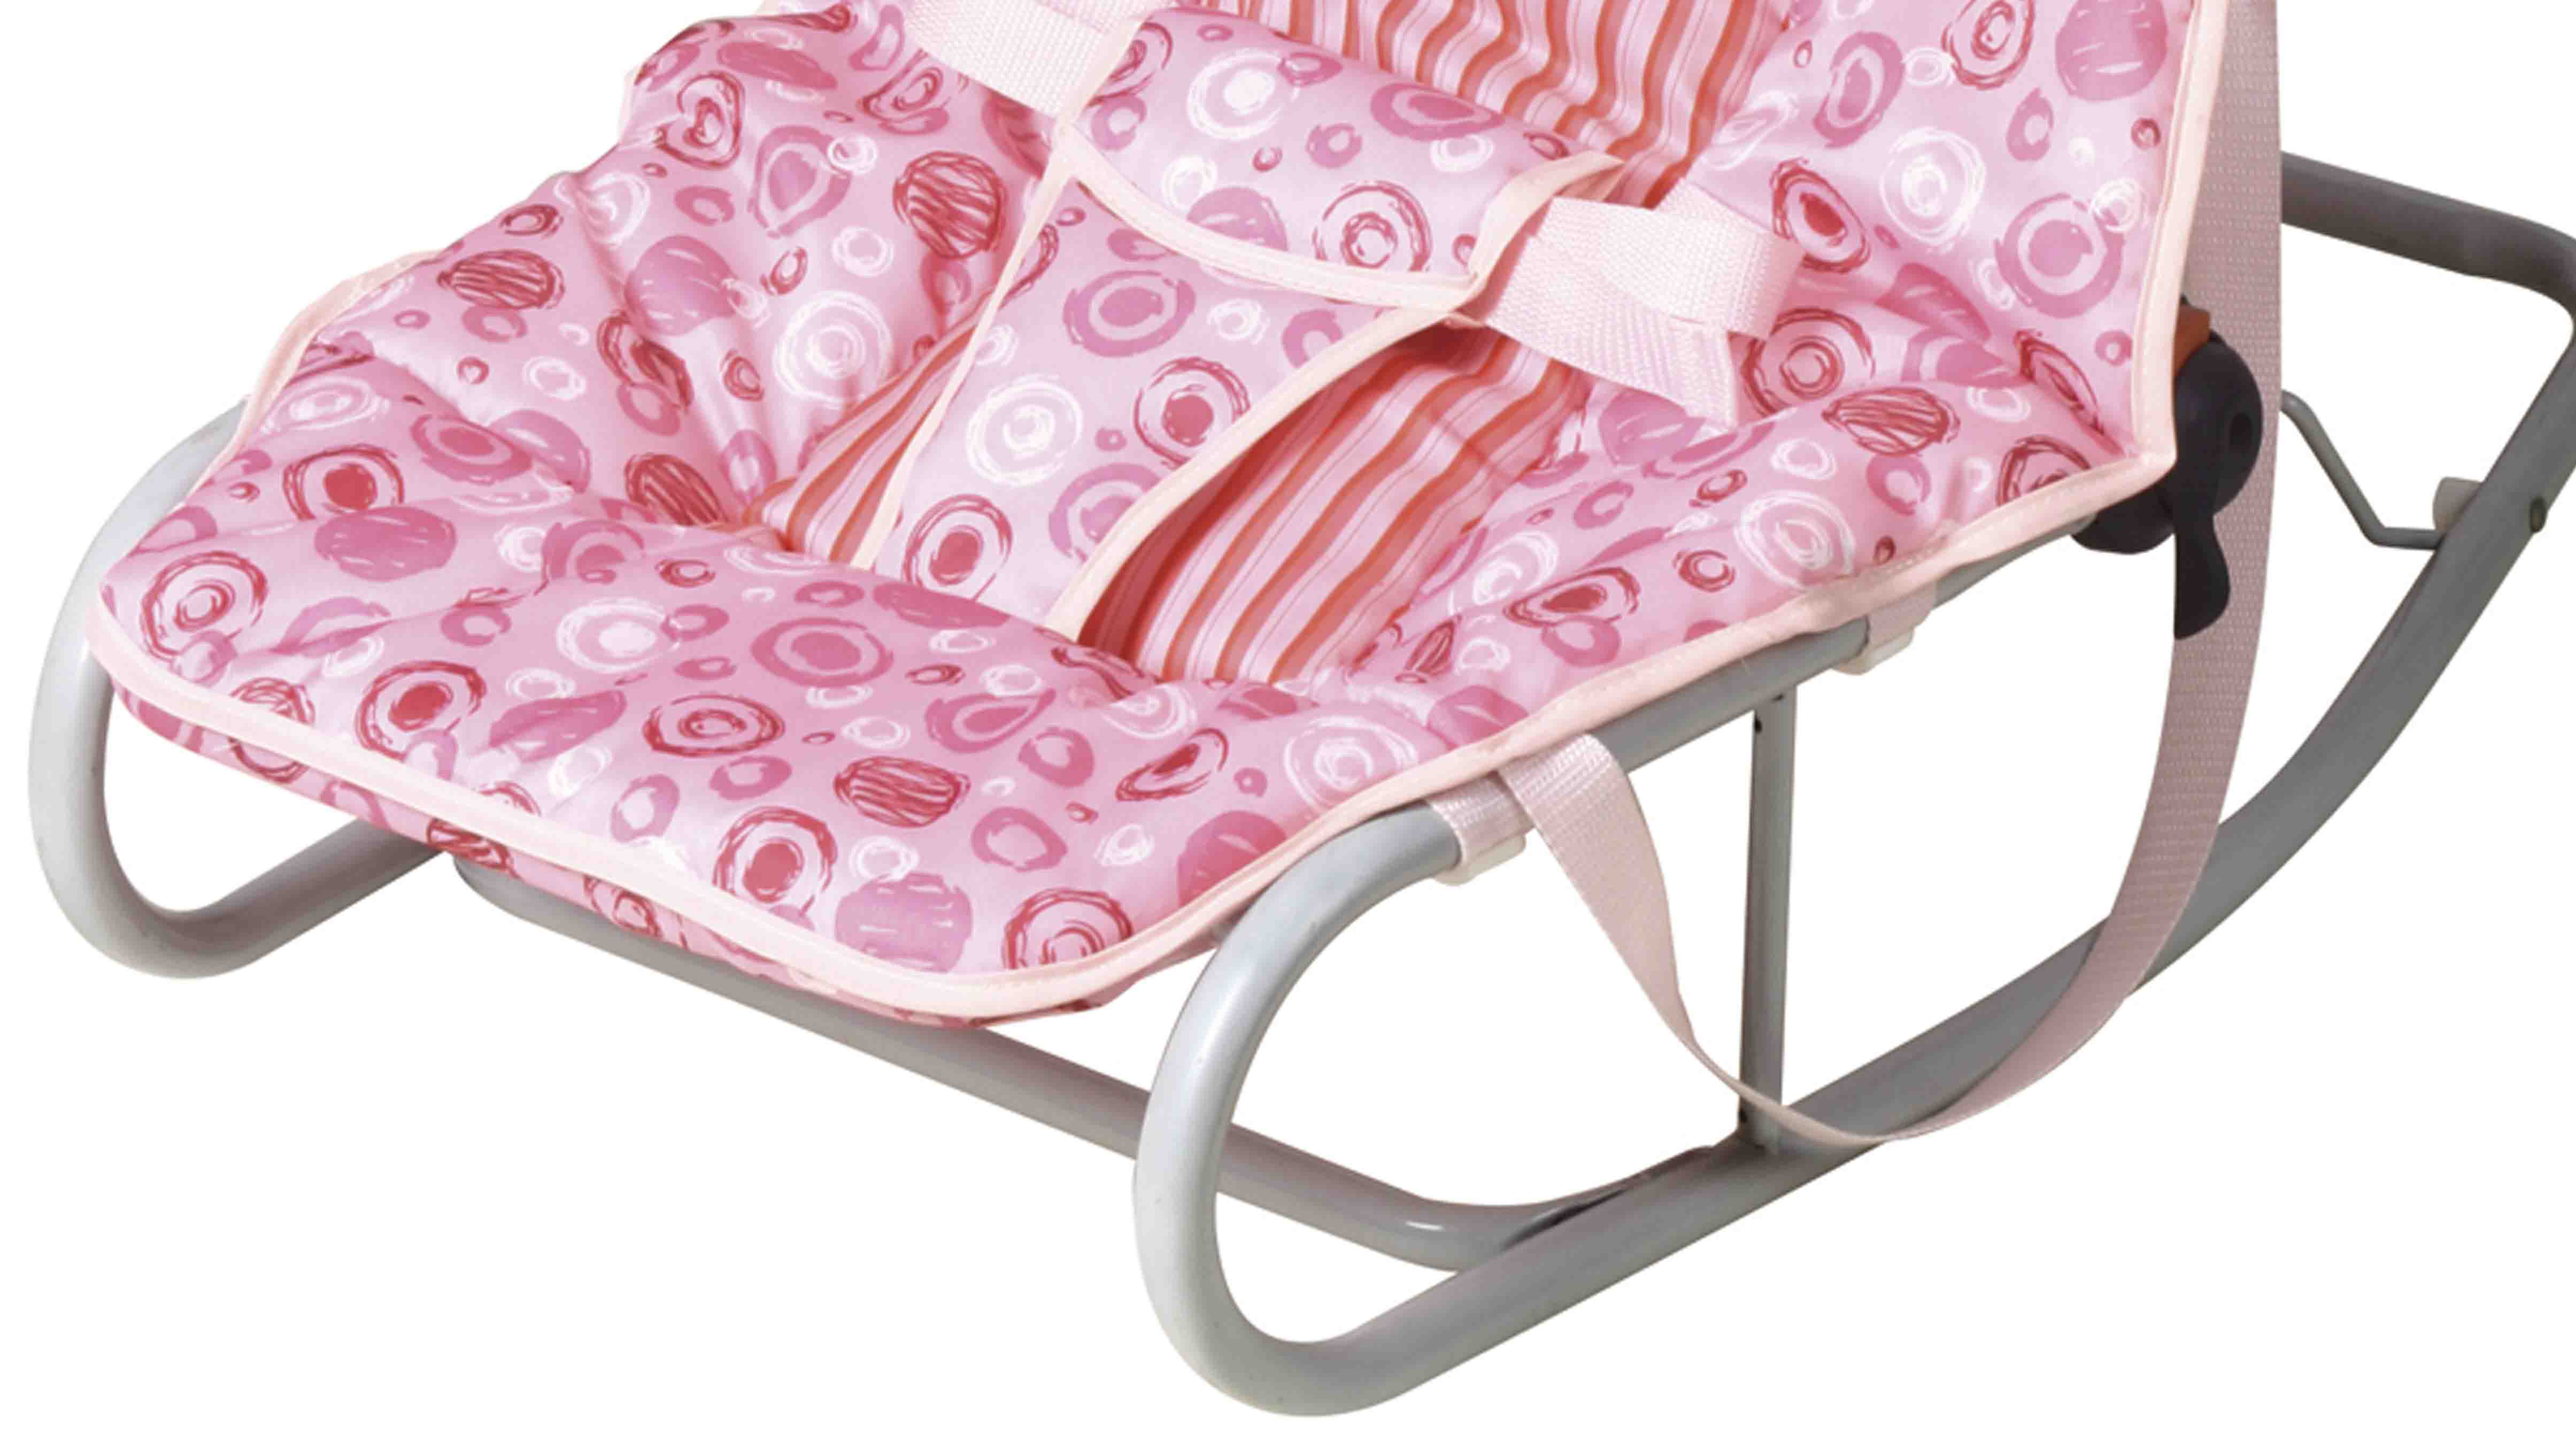 Aoqi swing infant rocking chair factory price for infant